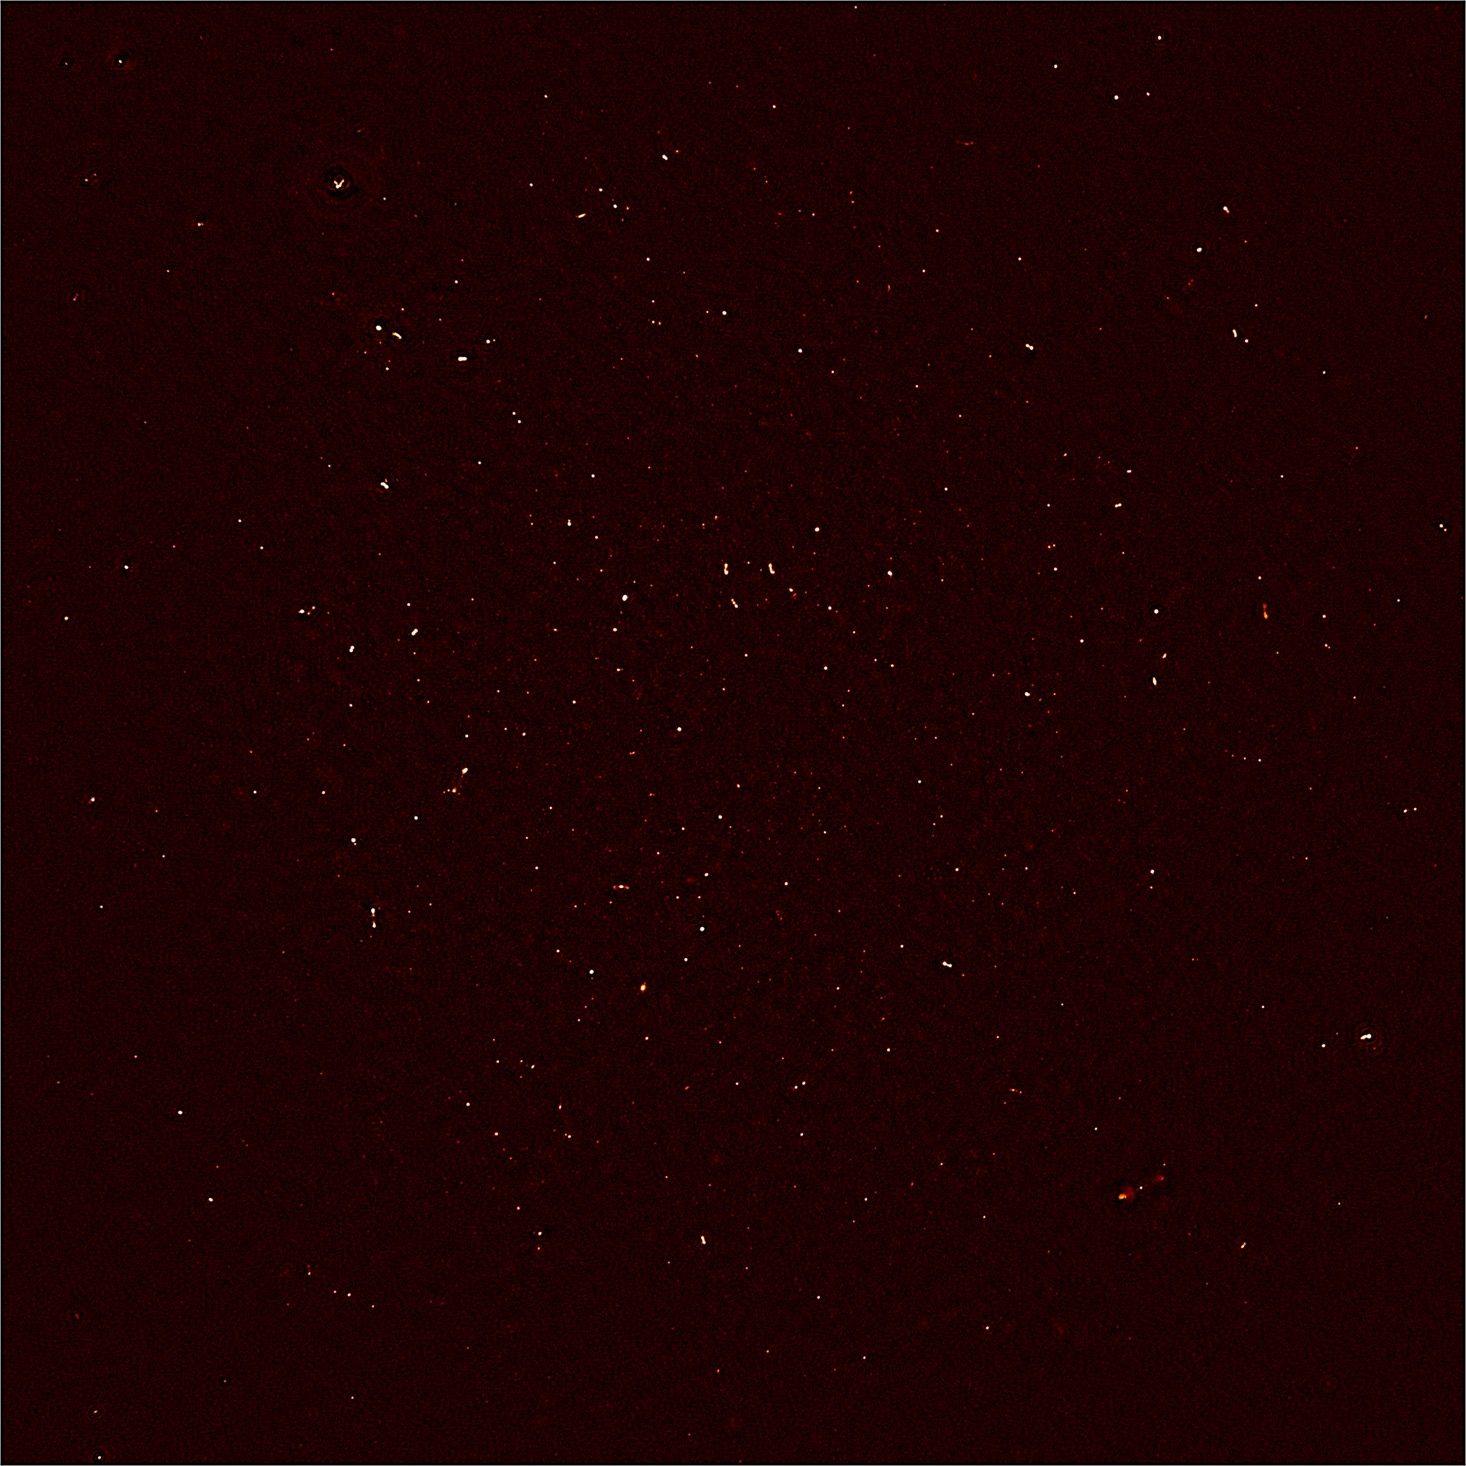 MeerKAT First Light image. Each white dot represents the intensity of radio waves recorded with 16 dishes of the MeerKAT telescope in the Karoo (when completed, MeerKAT will consist of 64 dishes and associated systems). More than 1300 individual objects - galaxies in the distant universe - are seen in this image. Image courtesy SKA 